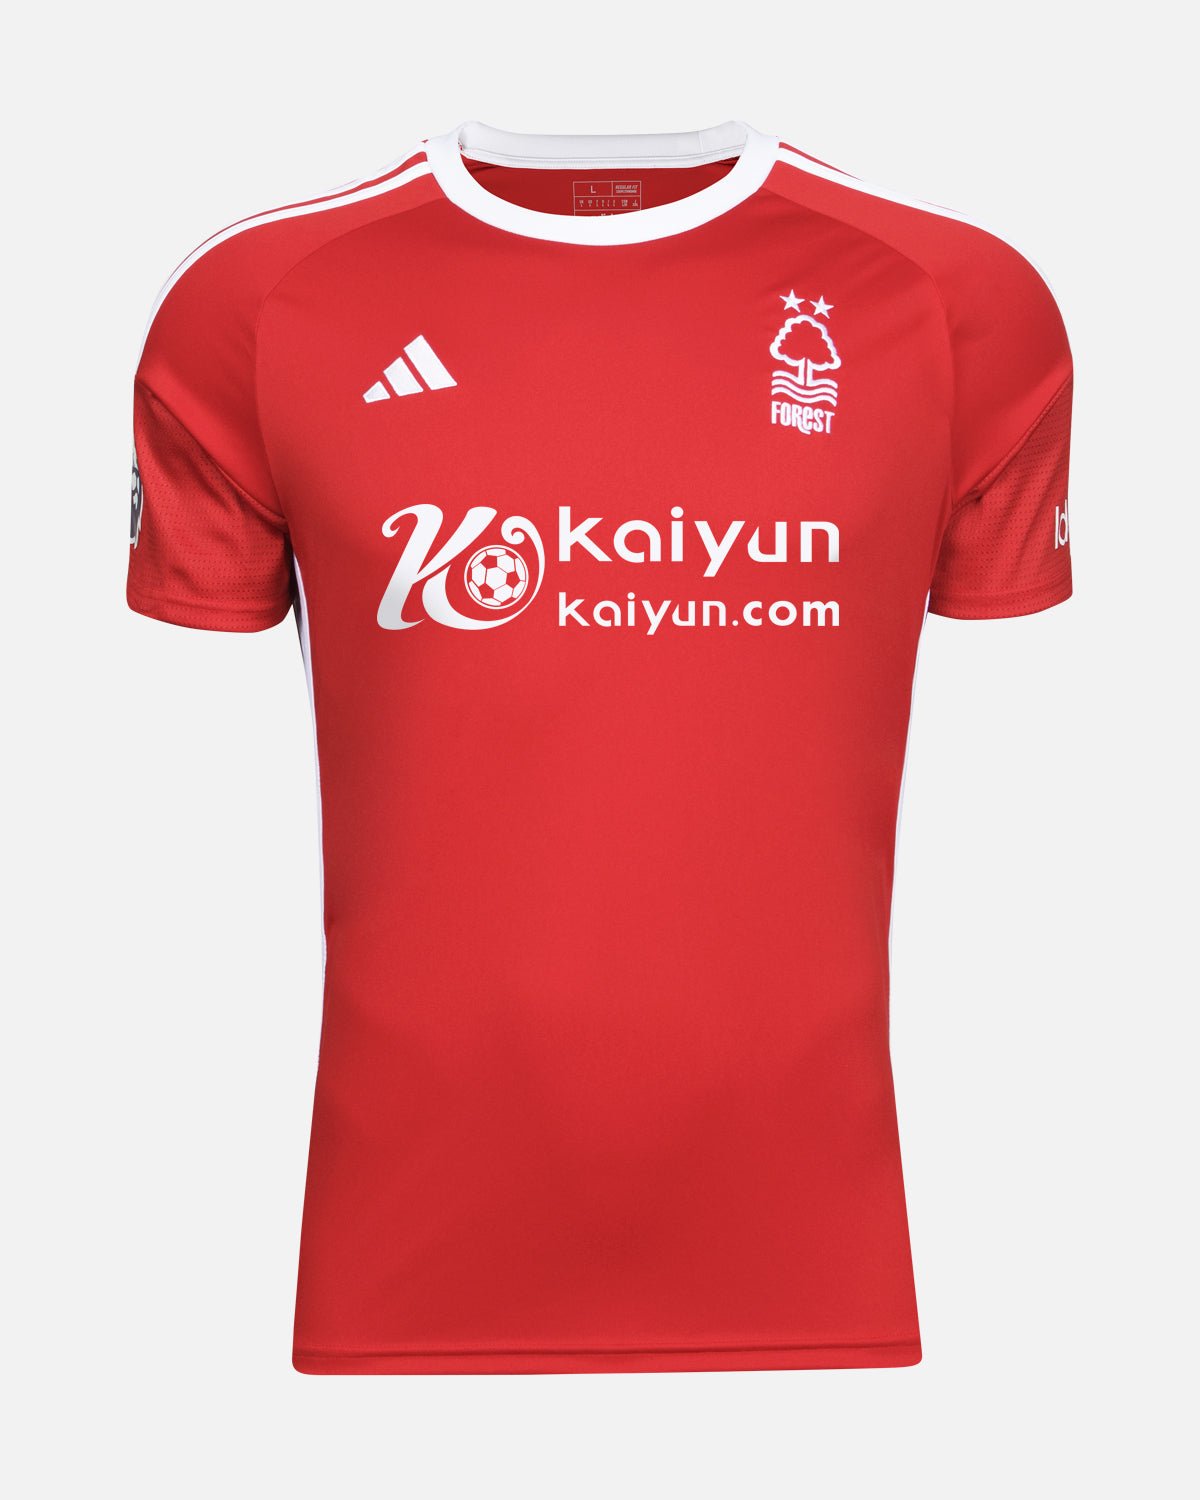 NFFC Home Shirt 23-24 - Williams 7 - Nottingham Forest FC